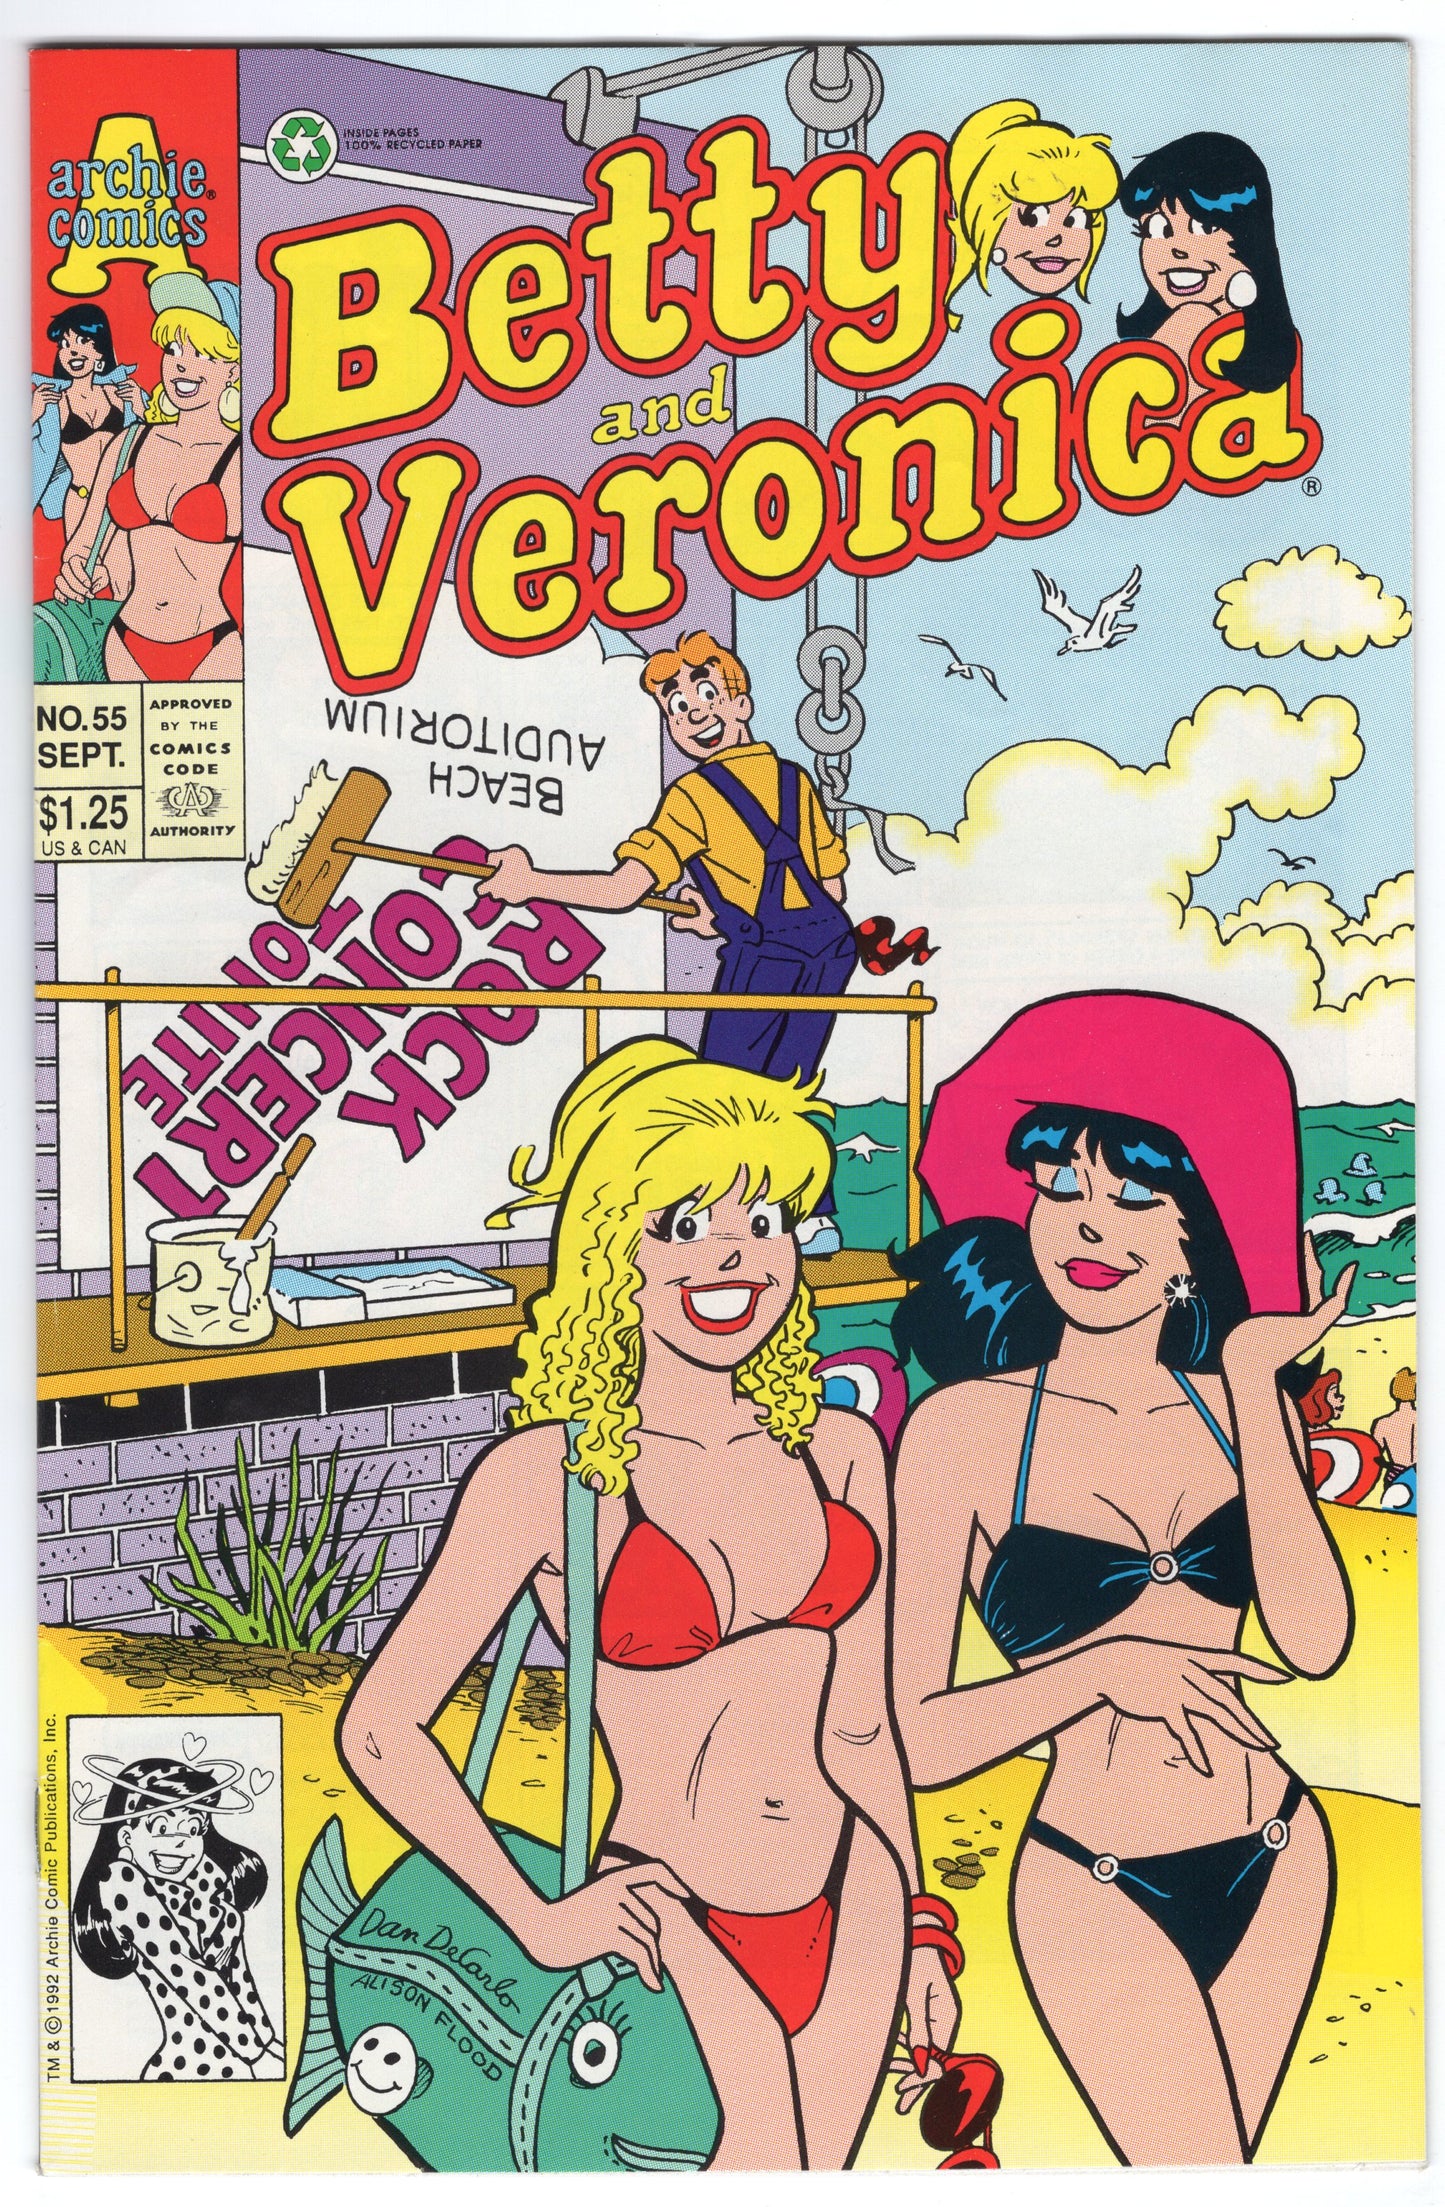 Betty and Veronica - Issue #55 (Sept. 1992 - Archie Comics) VF-